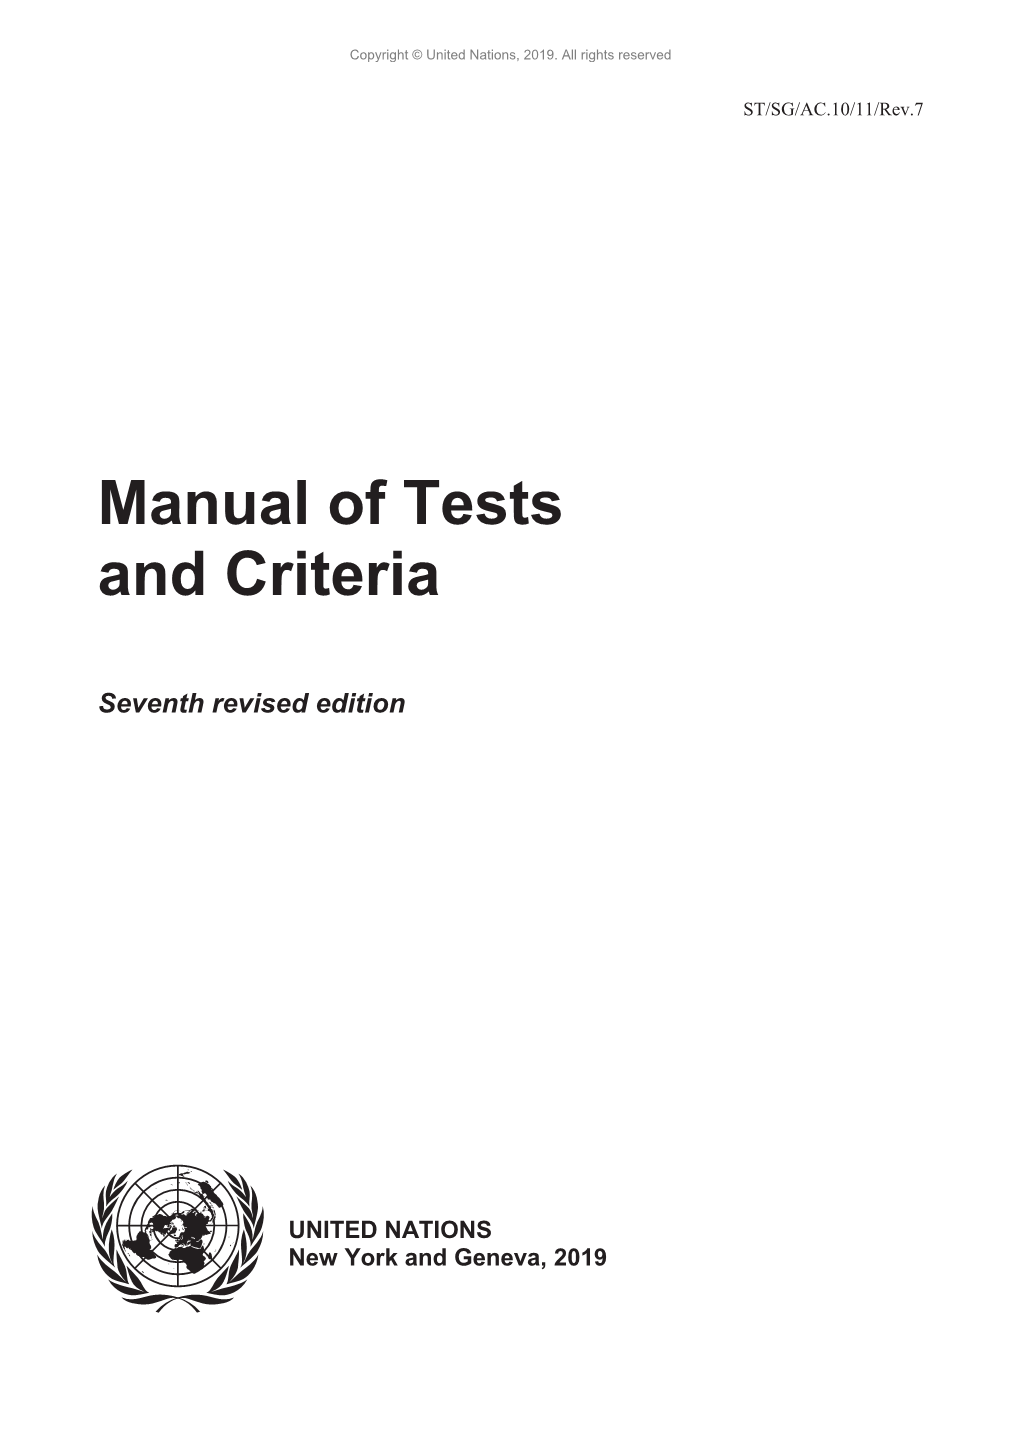 Manual of Tests and Criteria